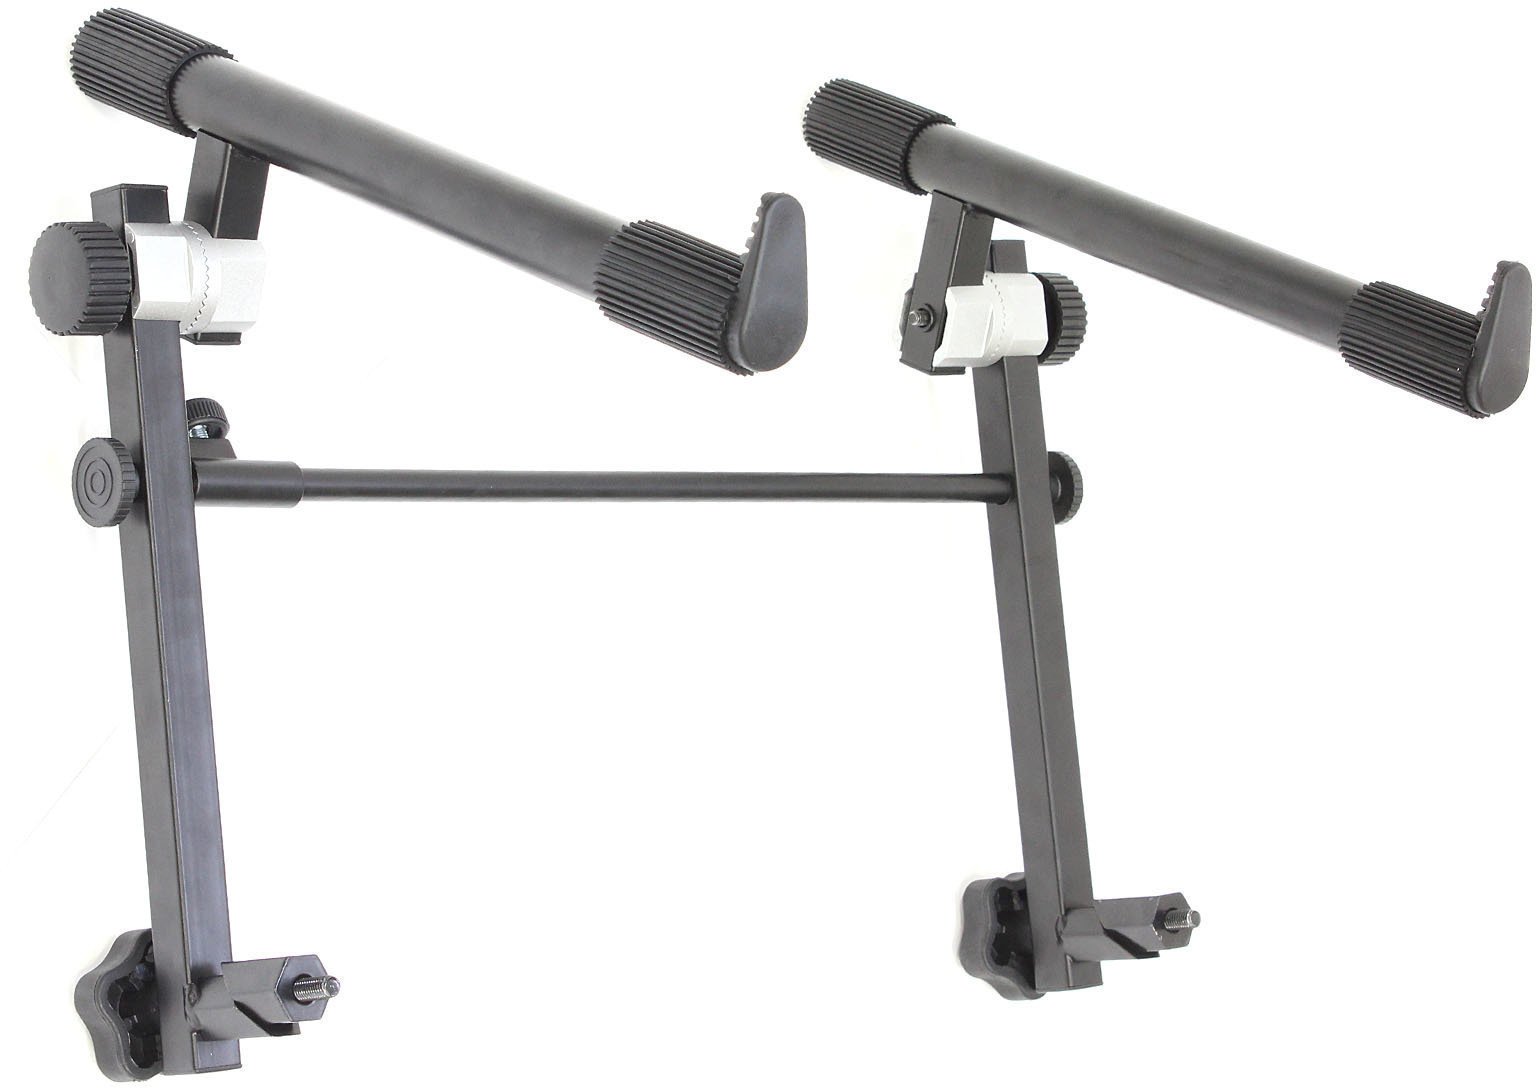 Keyboard stand accessories Soundking DF 087